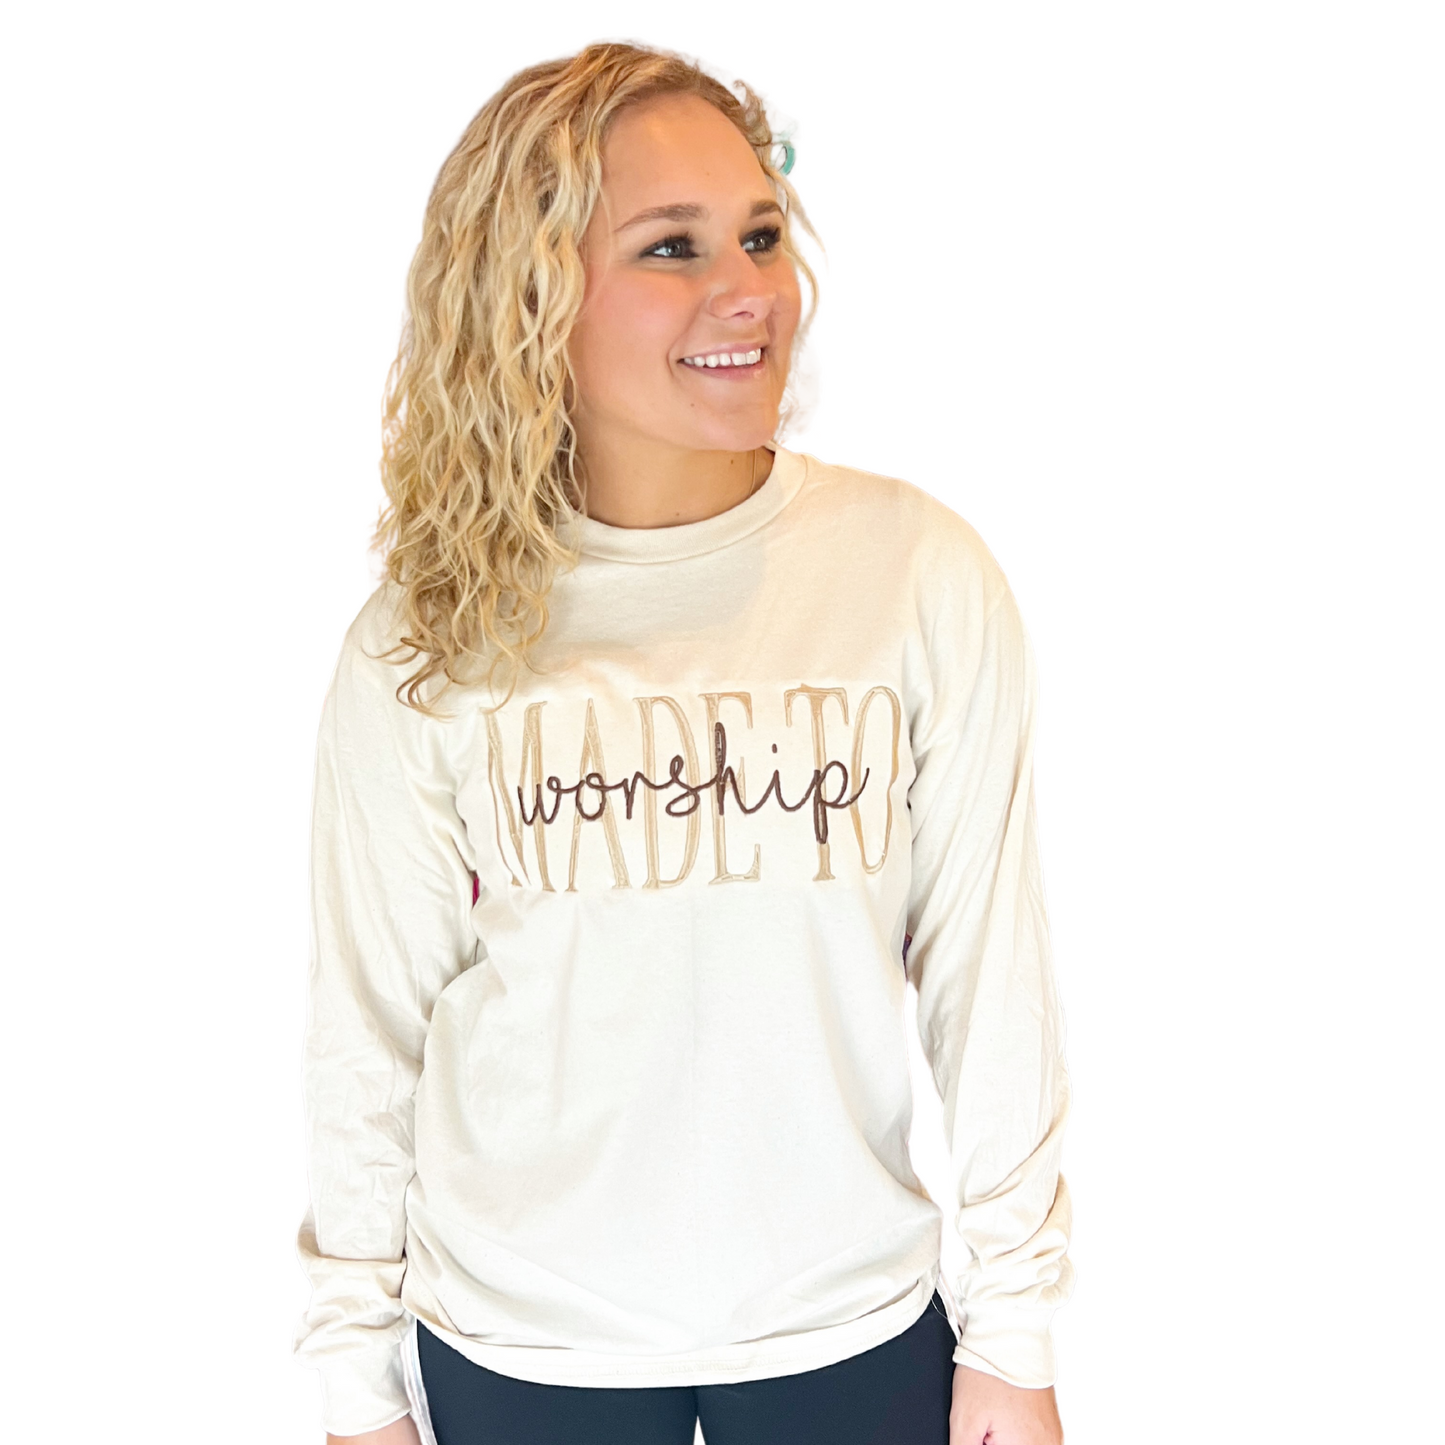 This stylish sweatshirt is perfect for any fan of the “Made To Worship” label. It is crafted from a lightweight cream fabric and is printed with the iconic “Made To Worship” logo. Wear this piece and show off your unique style.